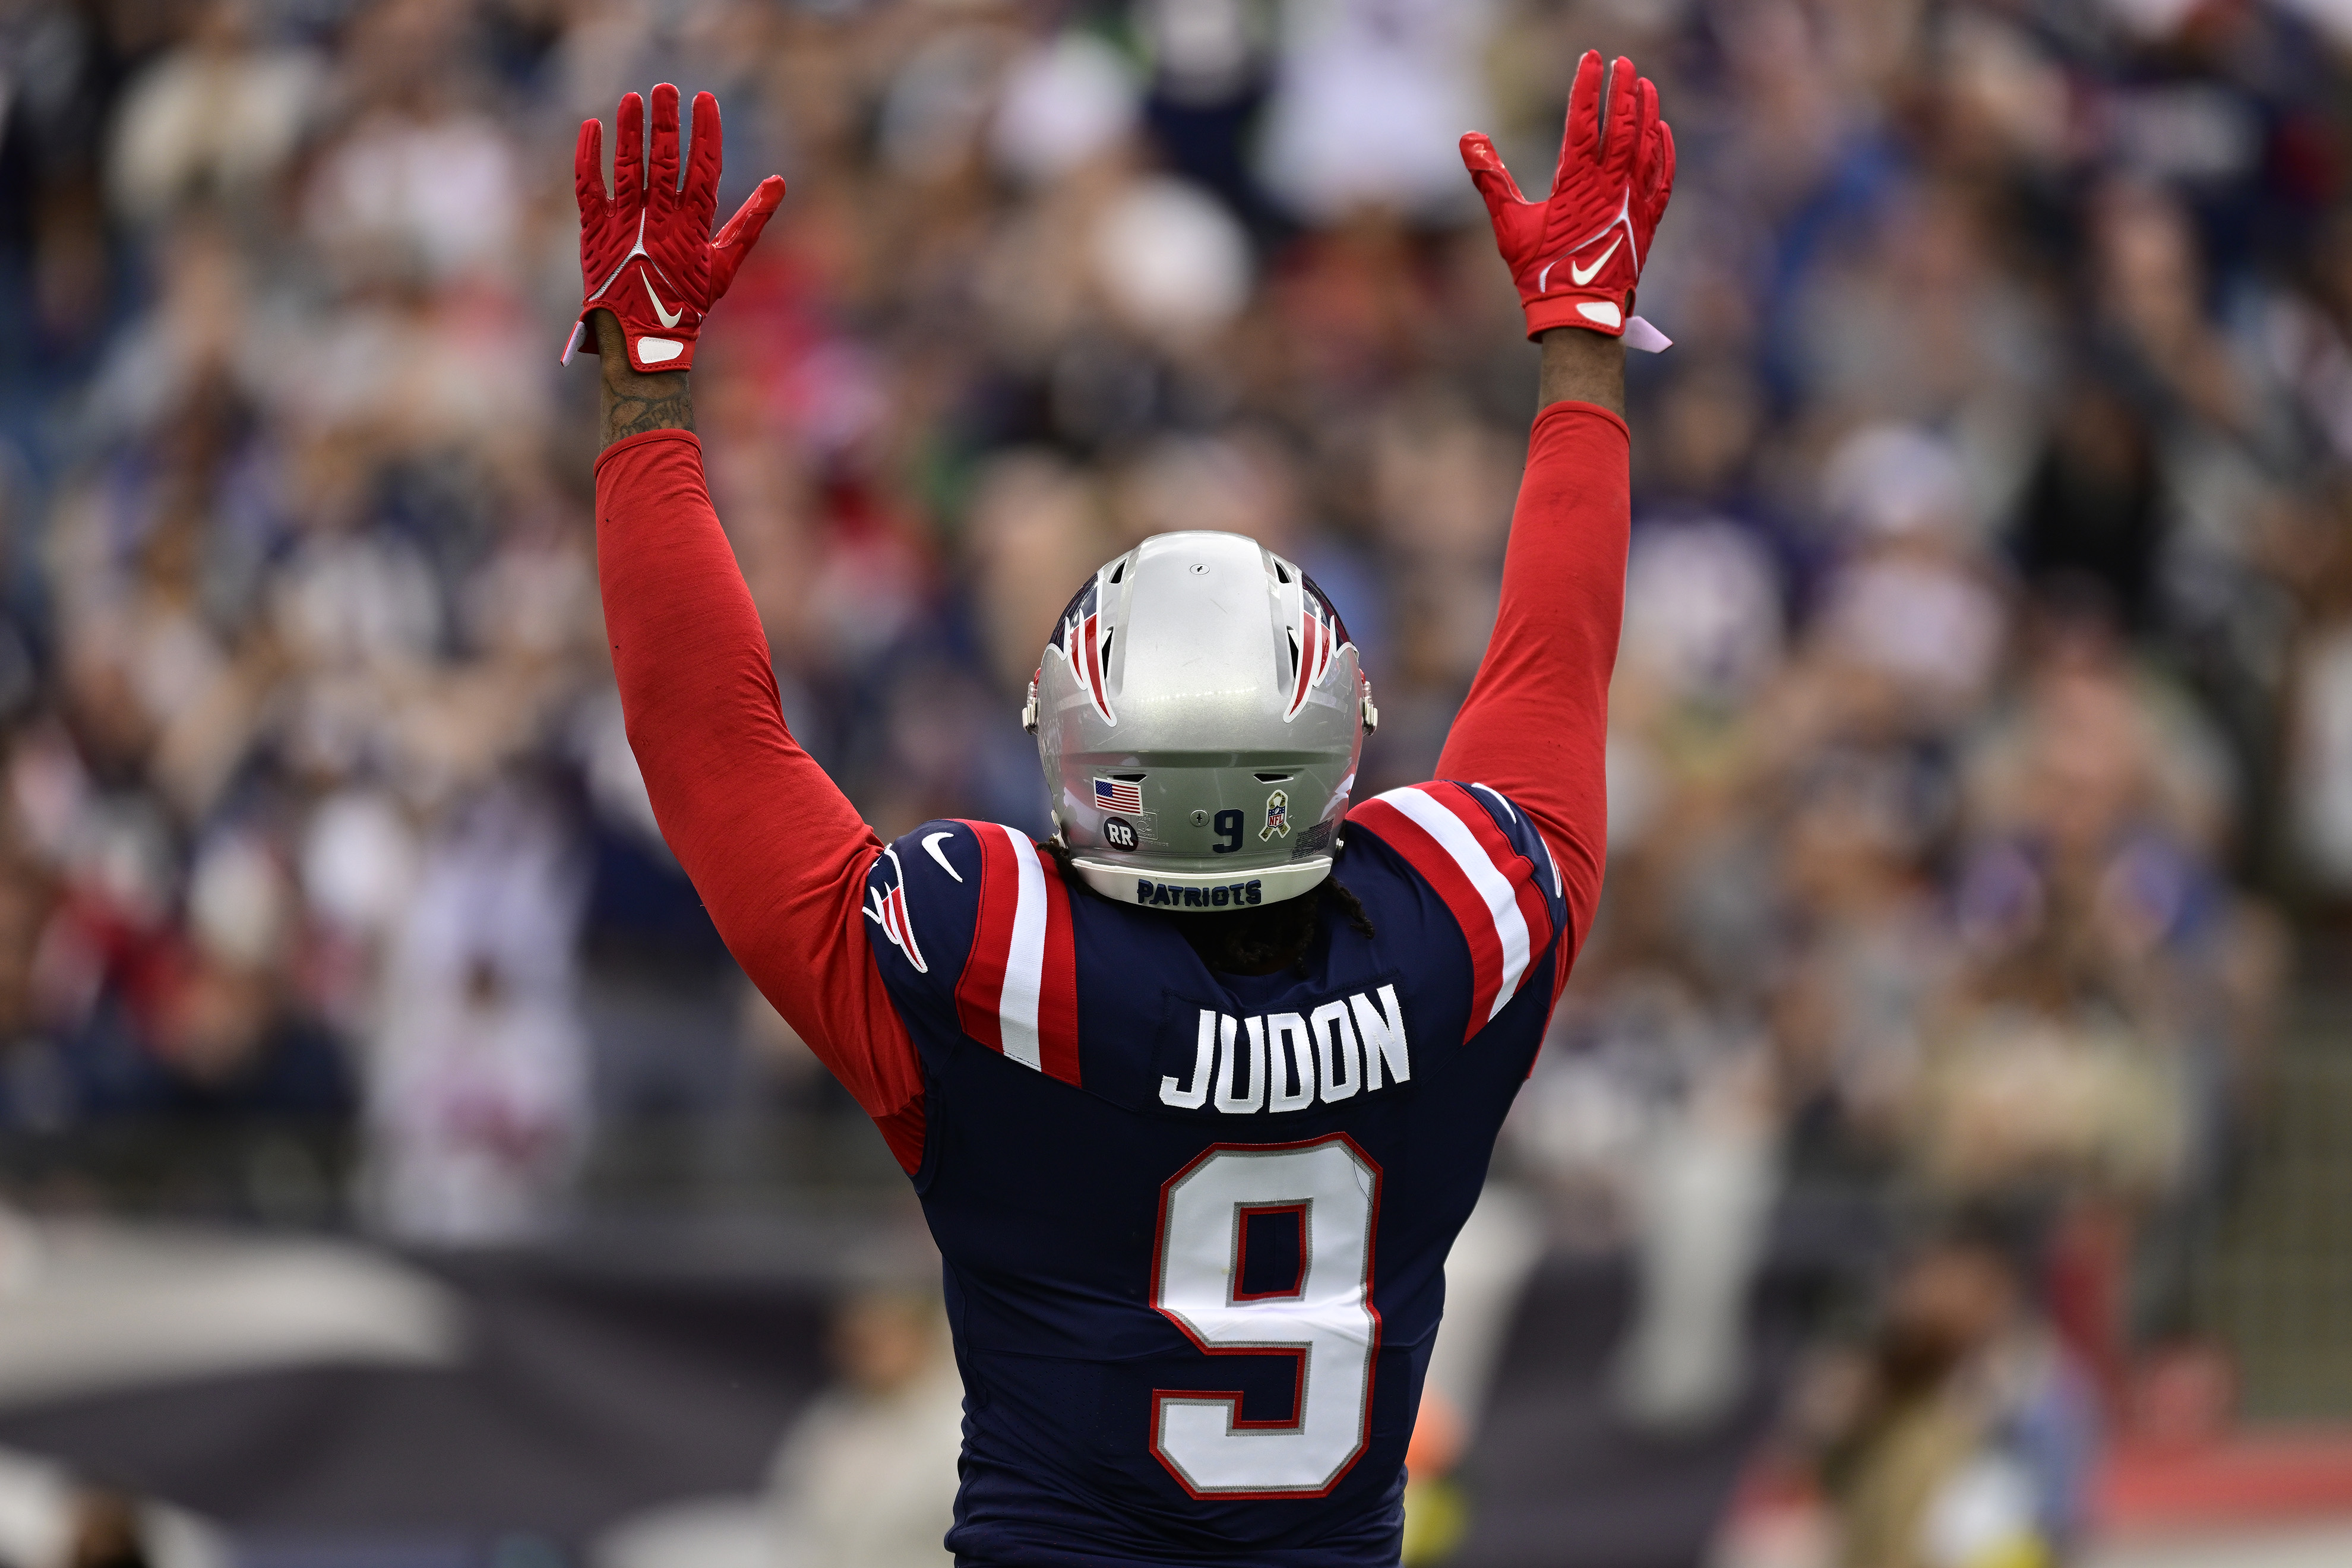 Matthew Judon of the New England Patriots reacts during a game against the Indianapolis Colts.